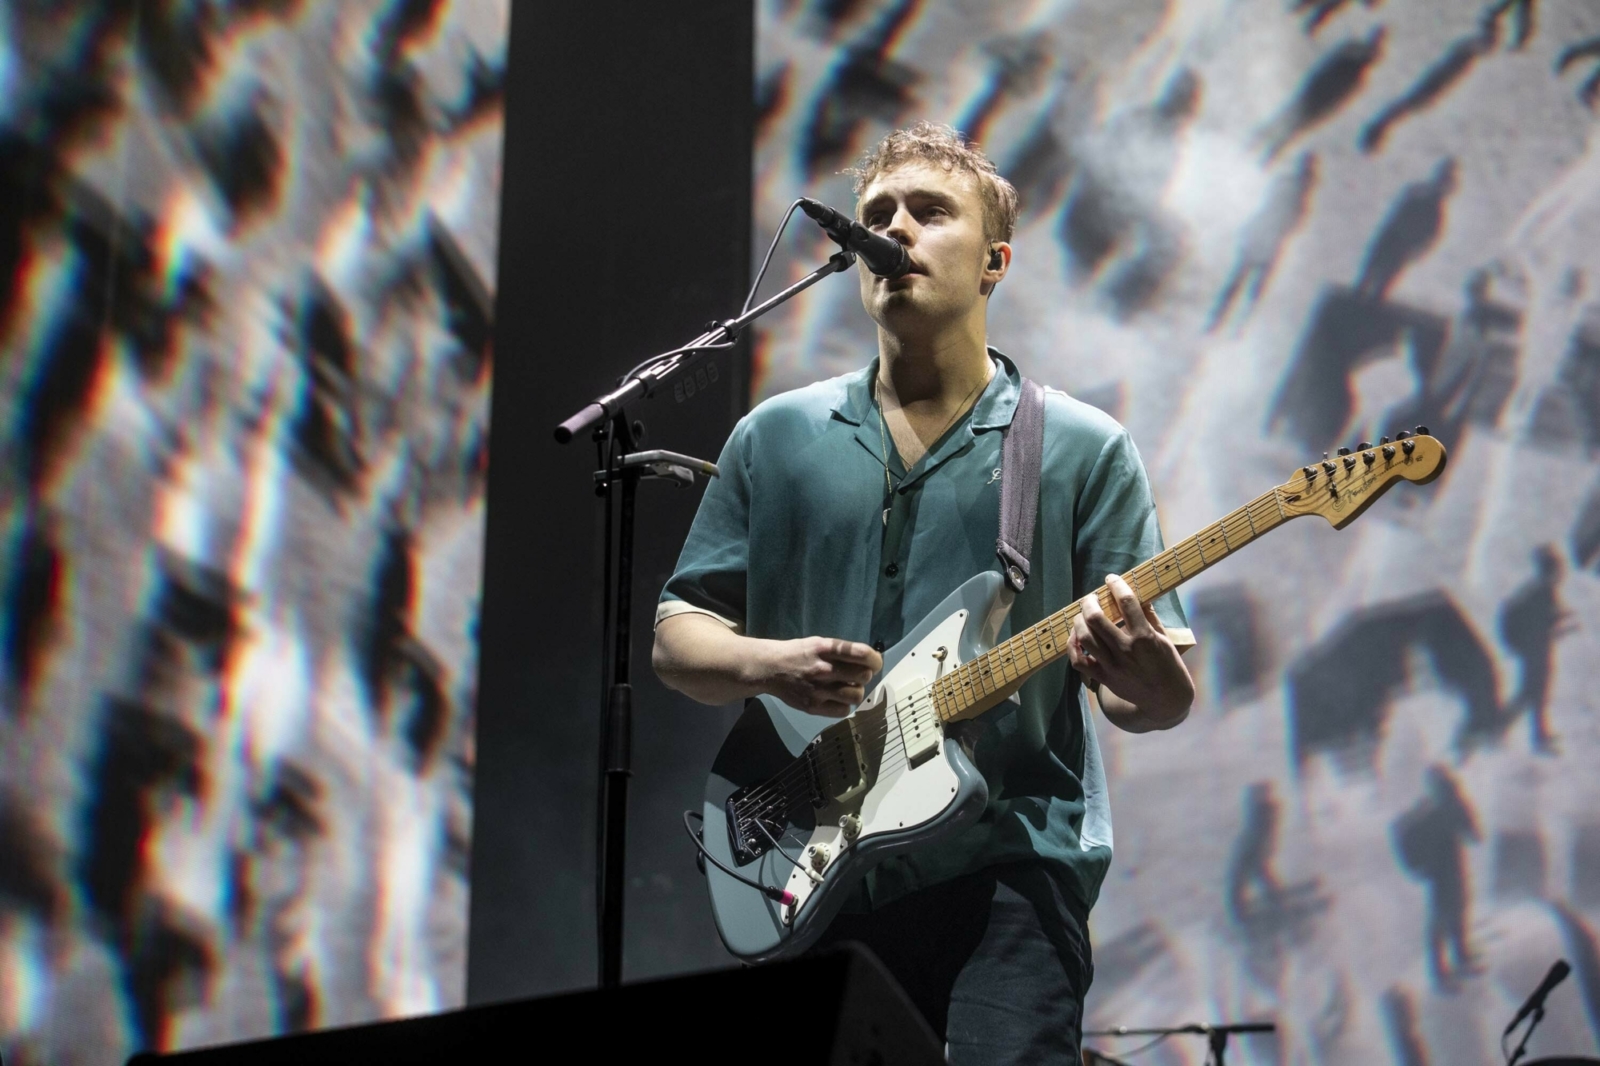 Sam Fender and Phoebe Bridgers to support The Rolling Stones at Hyde Park